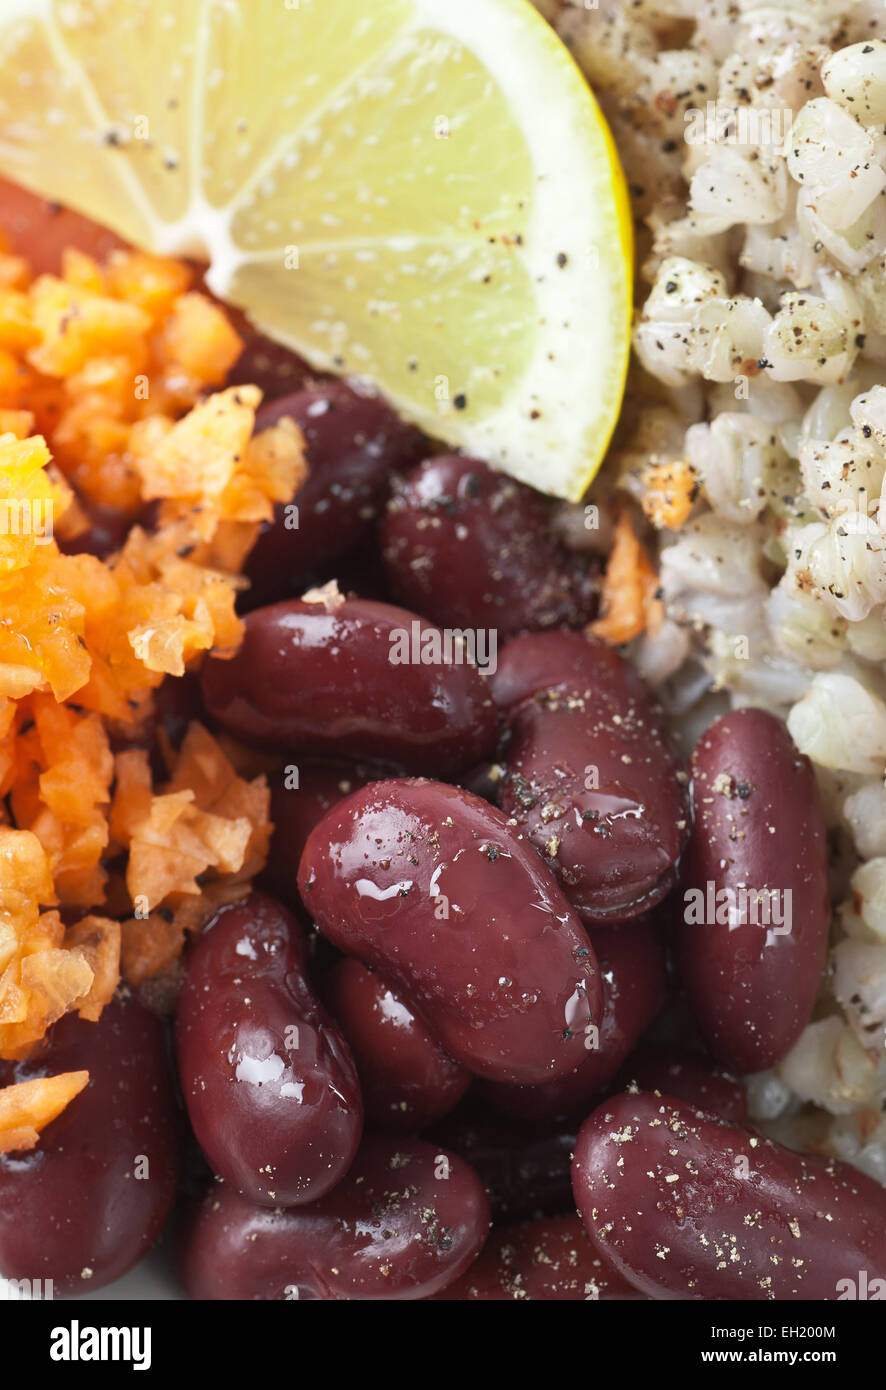 Prepared kidney beans, grated carrot and buckwheat. Served with lemon, olive oil and black pepper. Stock Photo